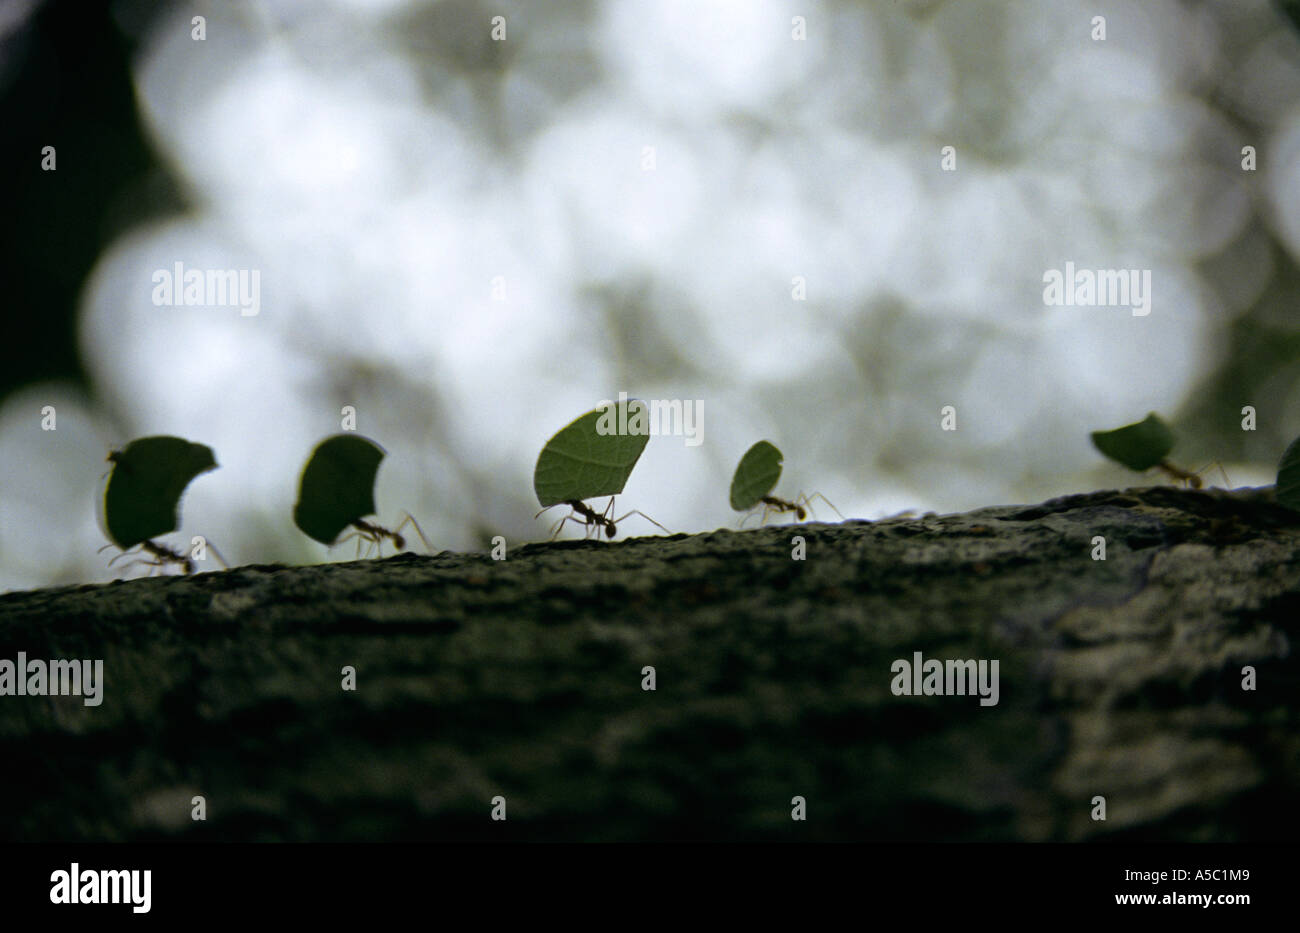 Ants carrying leaves on bark Stock Photo